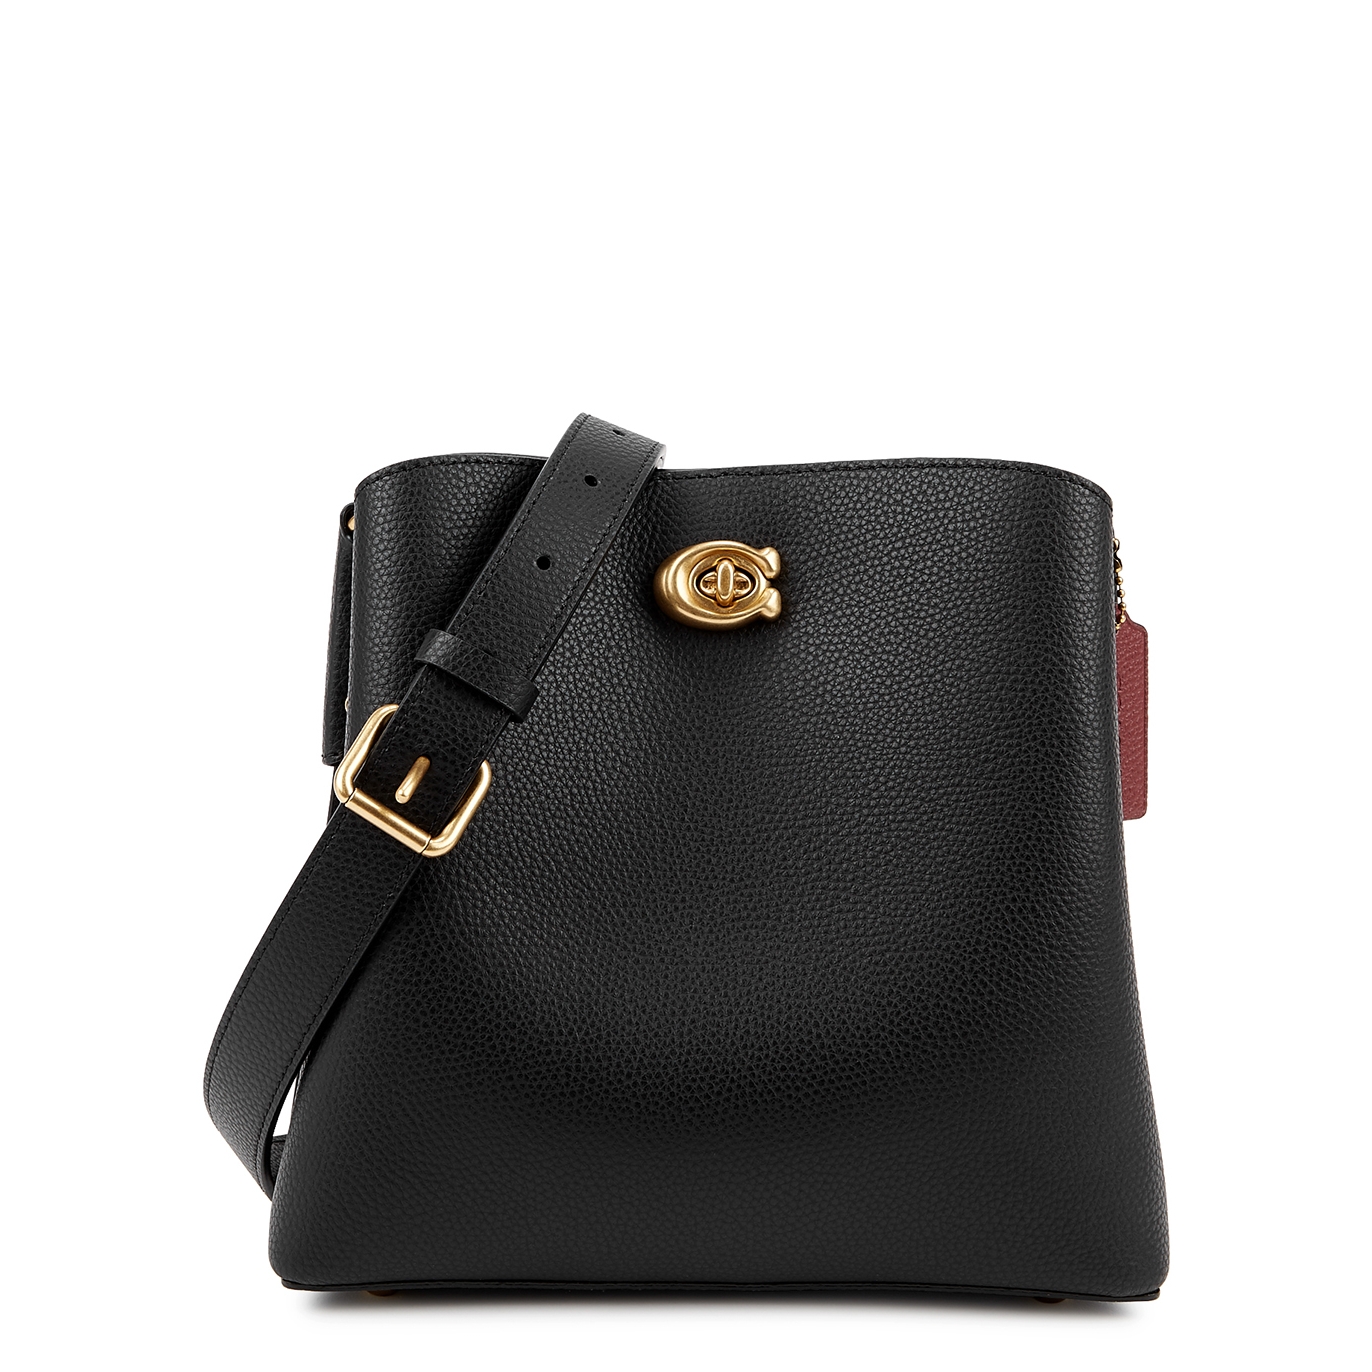 Coach Willow Black Leather Bucket Bag, Bucket Bag, Black, Leather